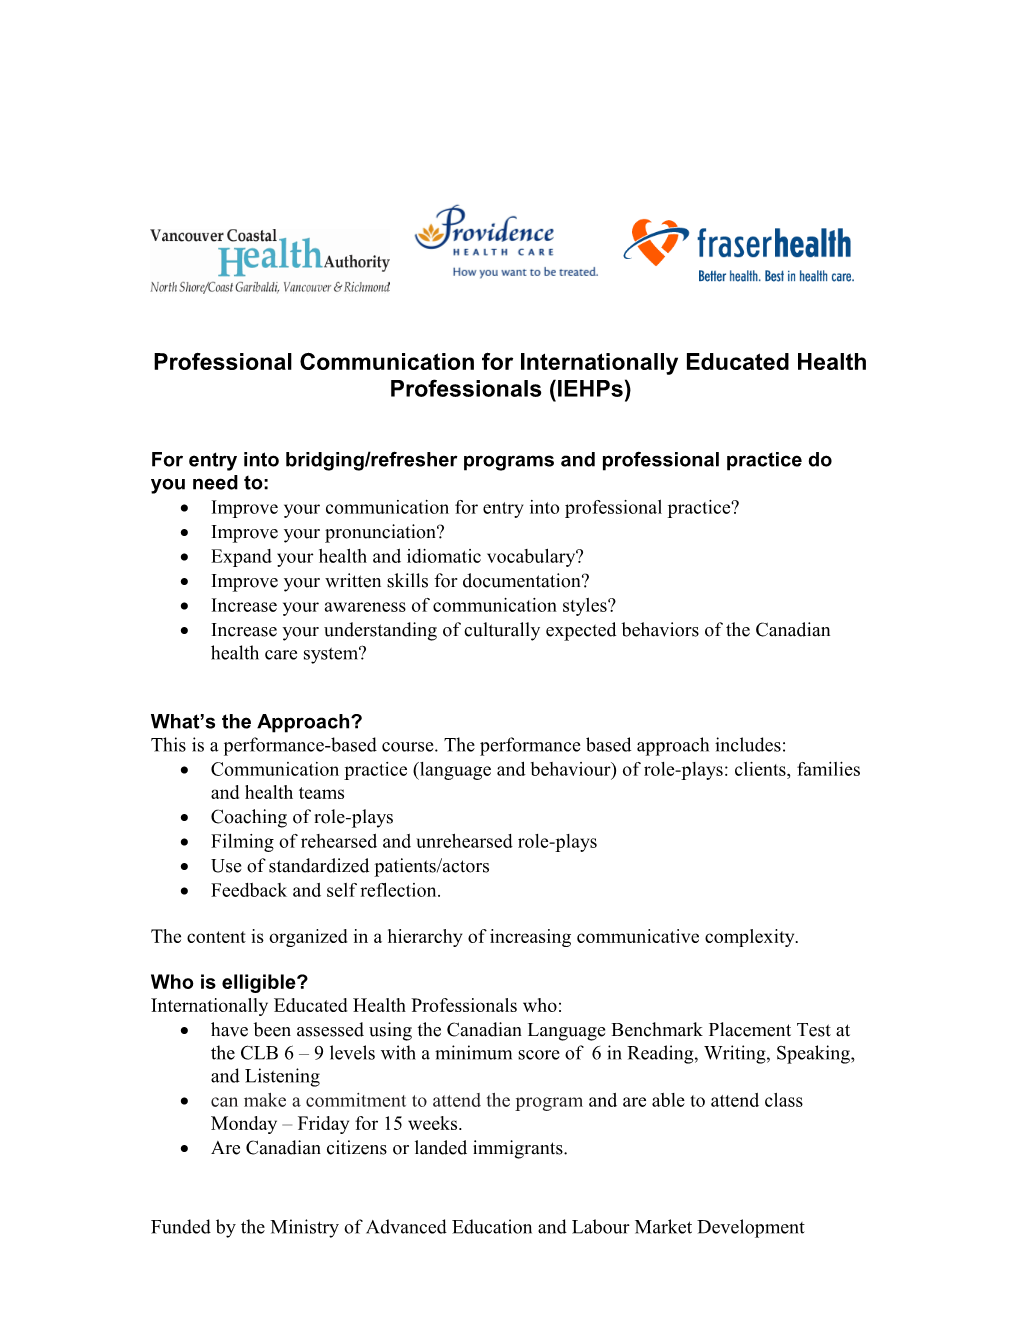 Workplace Communication Skills Course for Internationally Educated Health Professionals